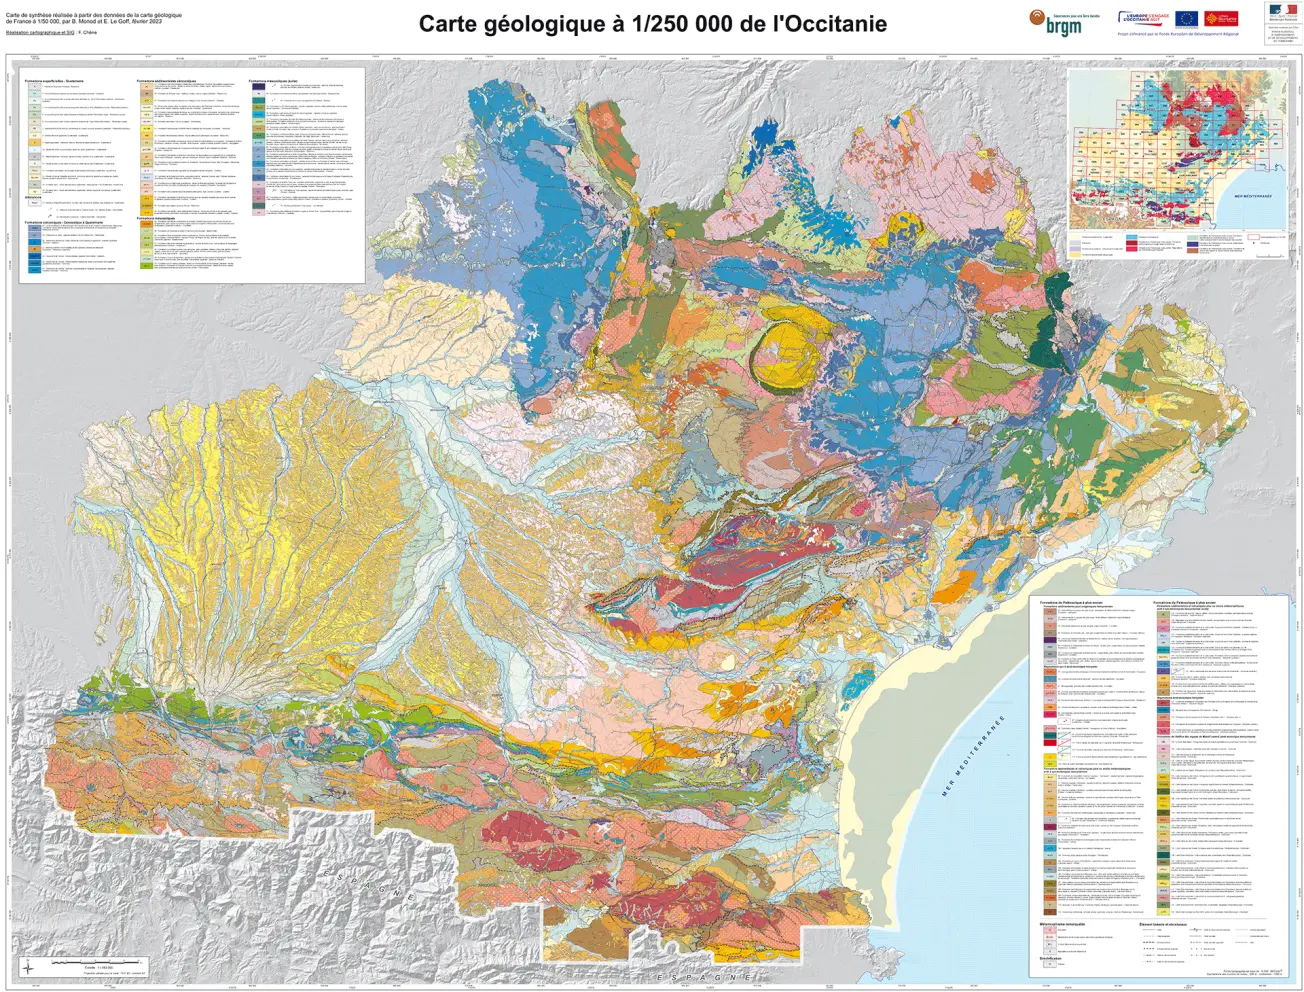 1:250,000 geological map of the Occitania Region.